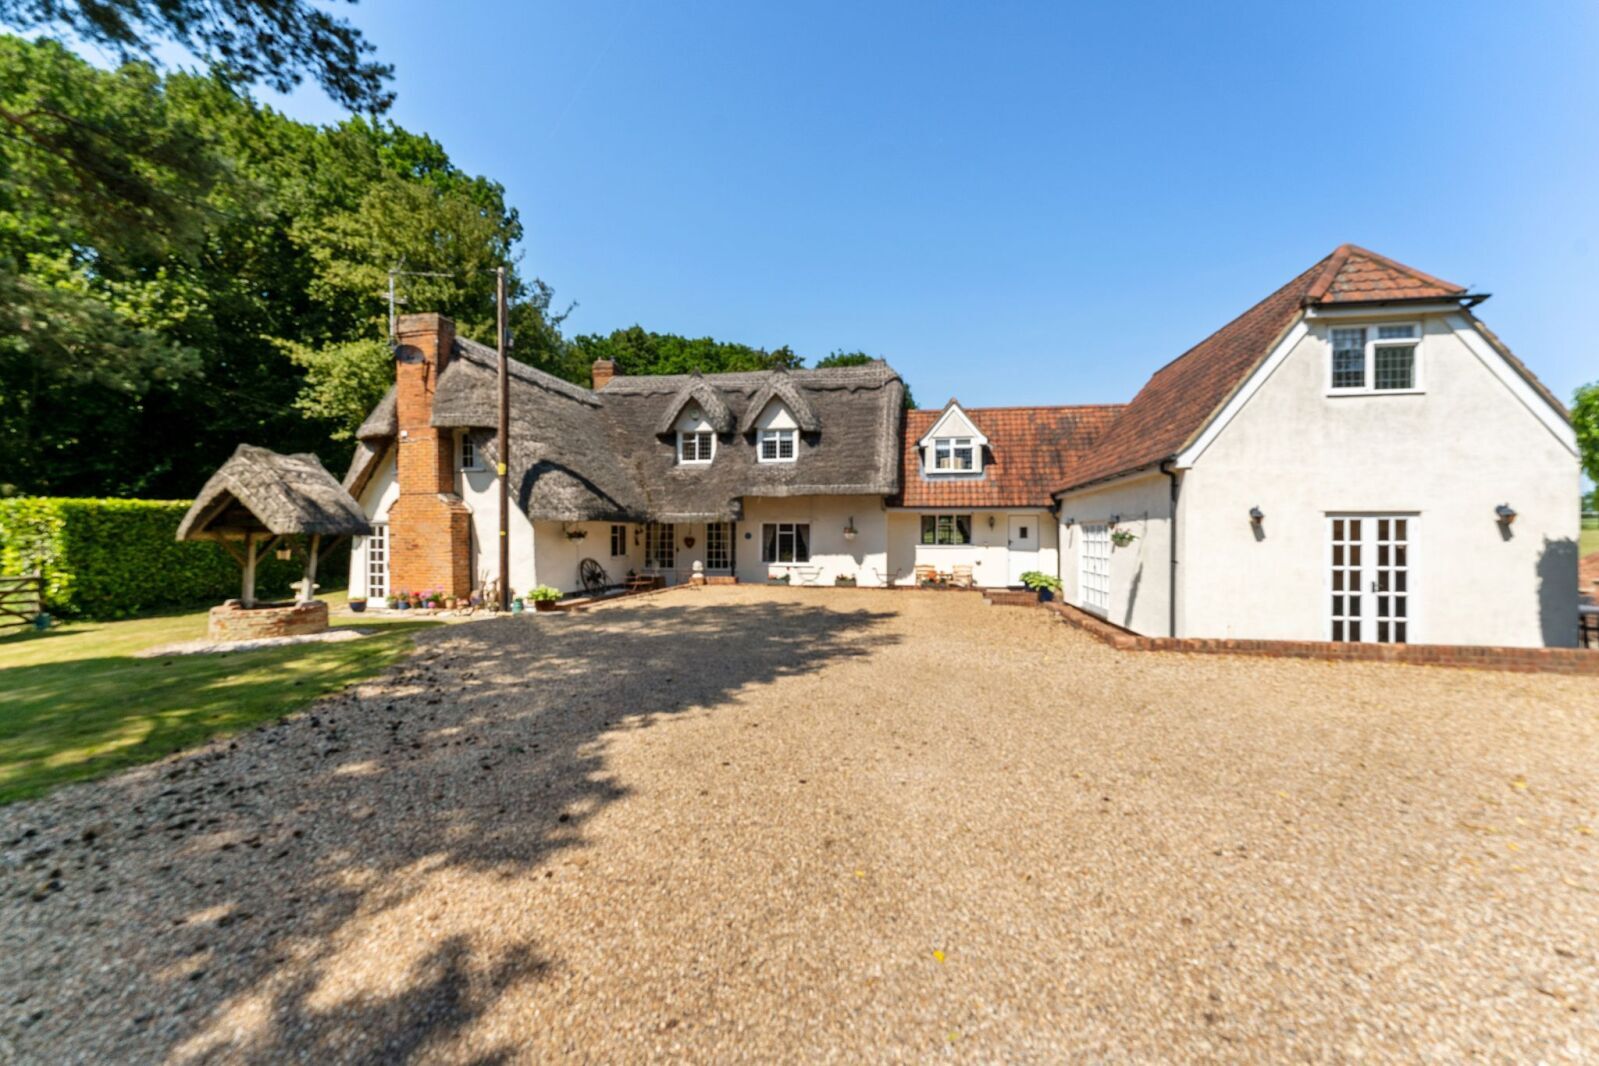 5 bedroom detached house for sale Great Canfield, Dunmow, CM6, main image